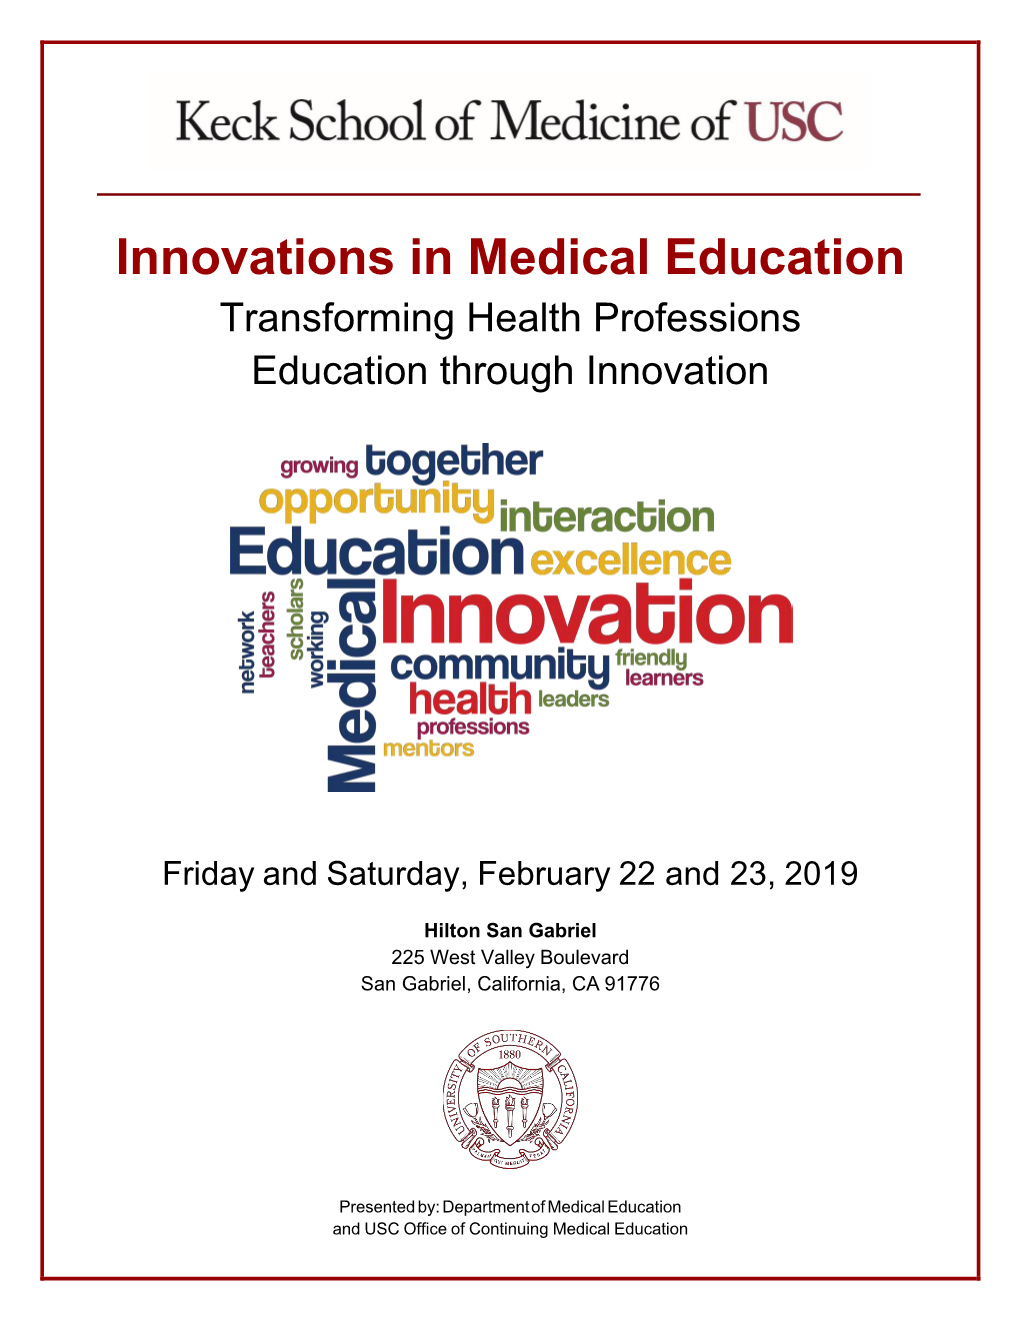 Innovations in Medical Education Transforming Health Professions Education Through Innovation